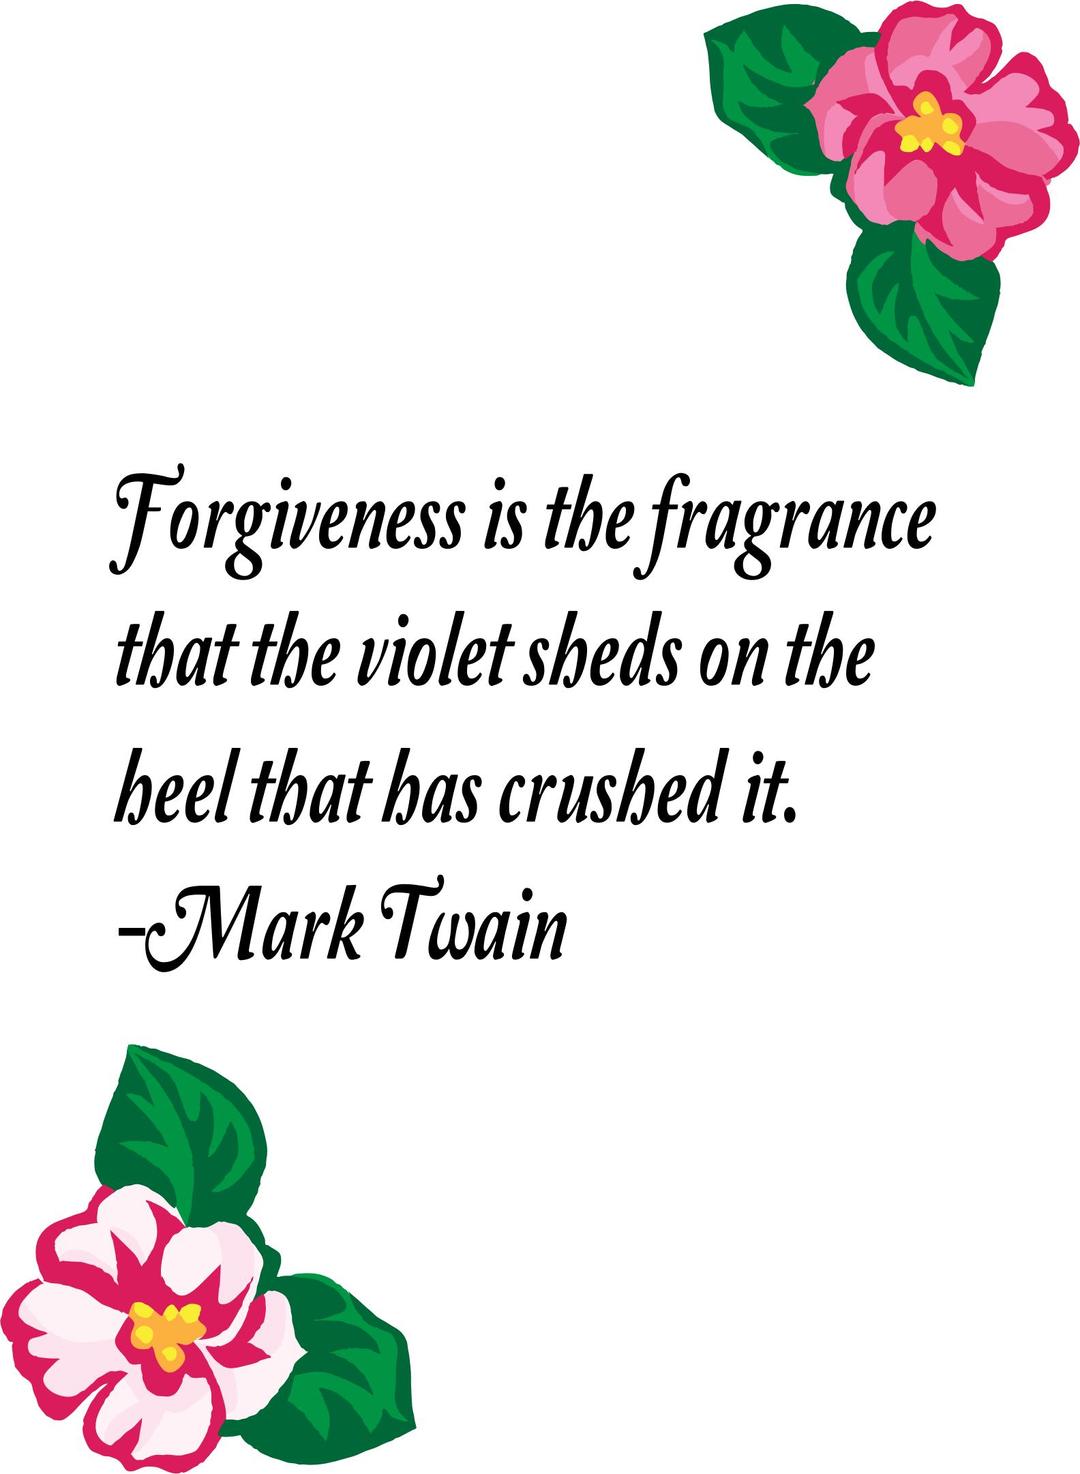 Forgiveness is the fragrance png transparent